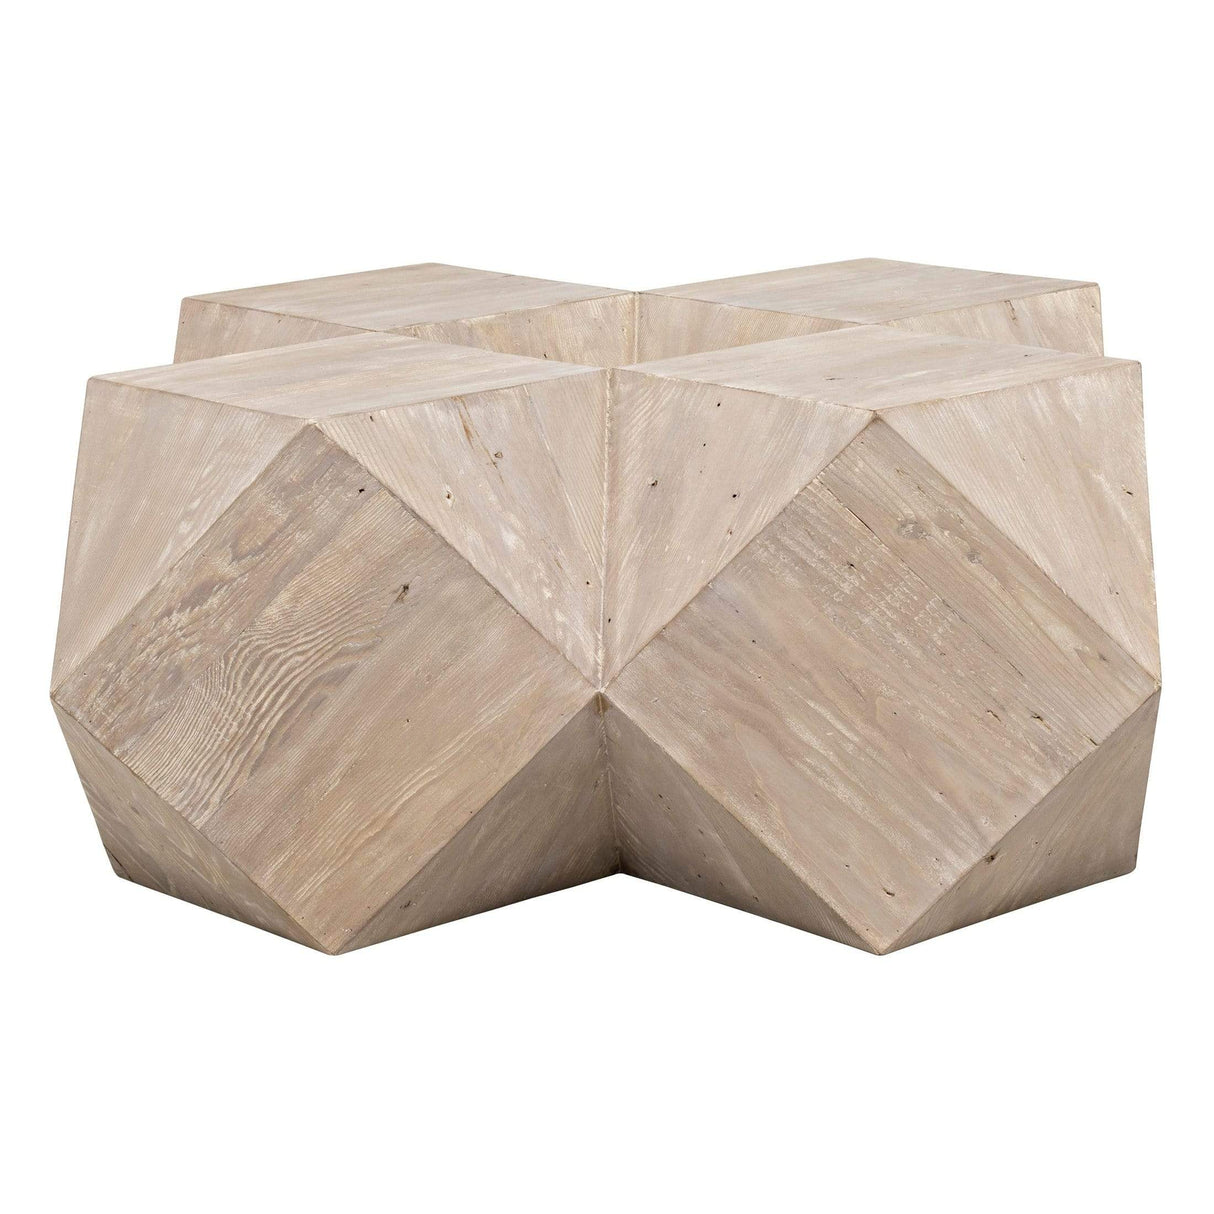 CFC Iconsahedron Coffee Table - Small Furniture cfc-OW322-S